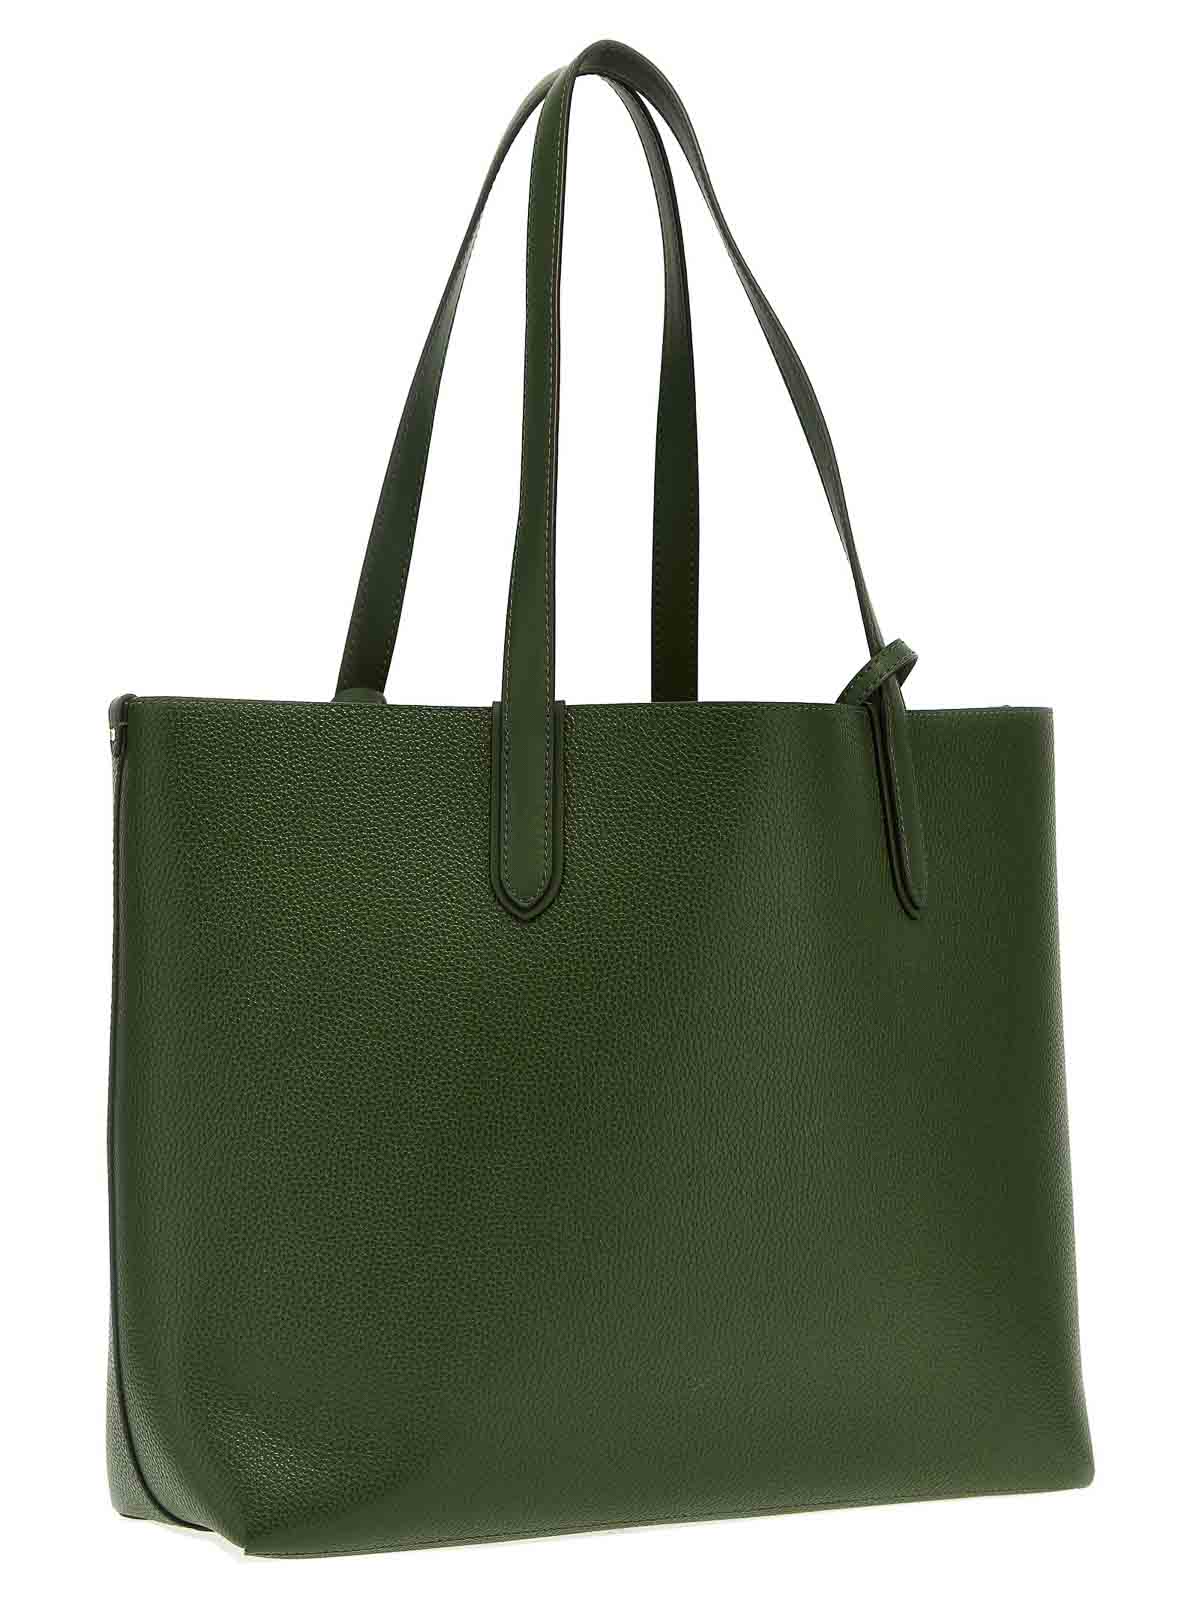 Original Michael Kors bag Authentic MK bag in deep green color. Limited  edition collection from a few years back. KORS Mi… | Michael kors bag, Michael  kors, Mk bags